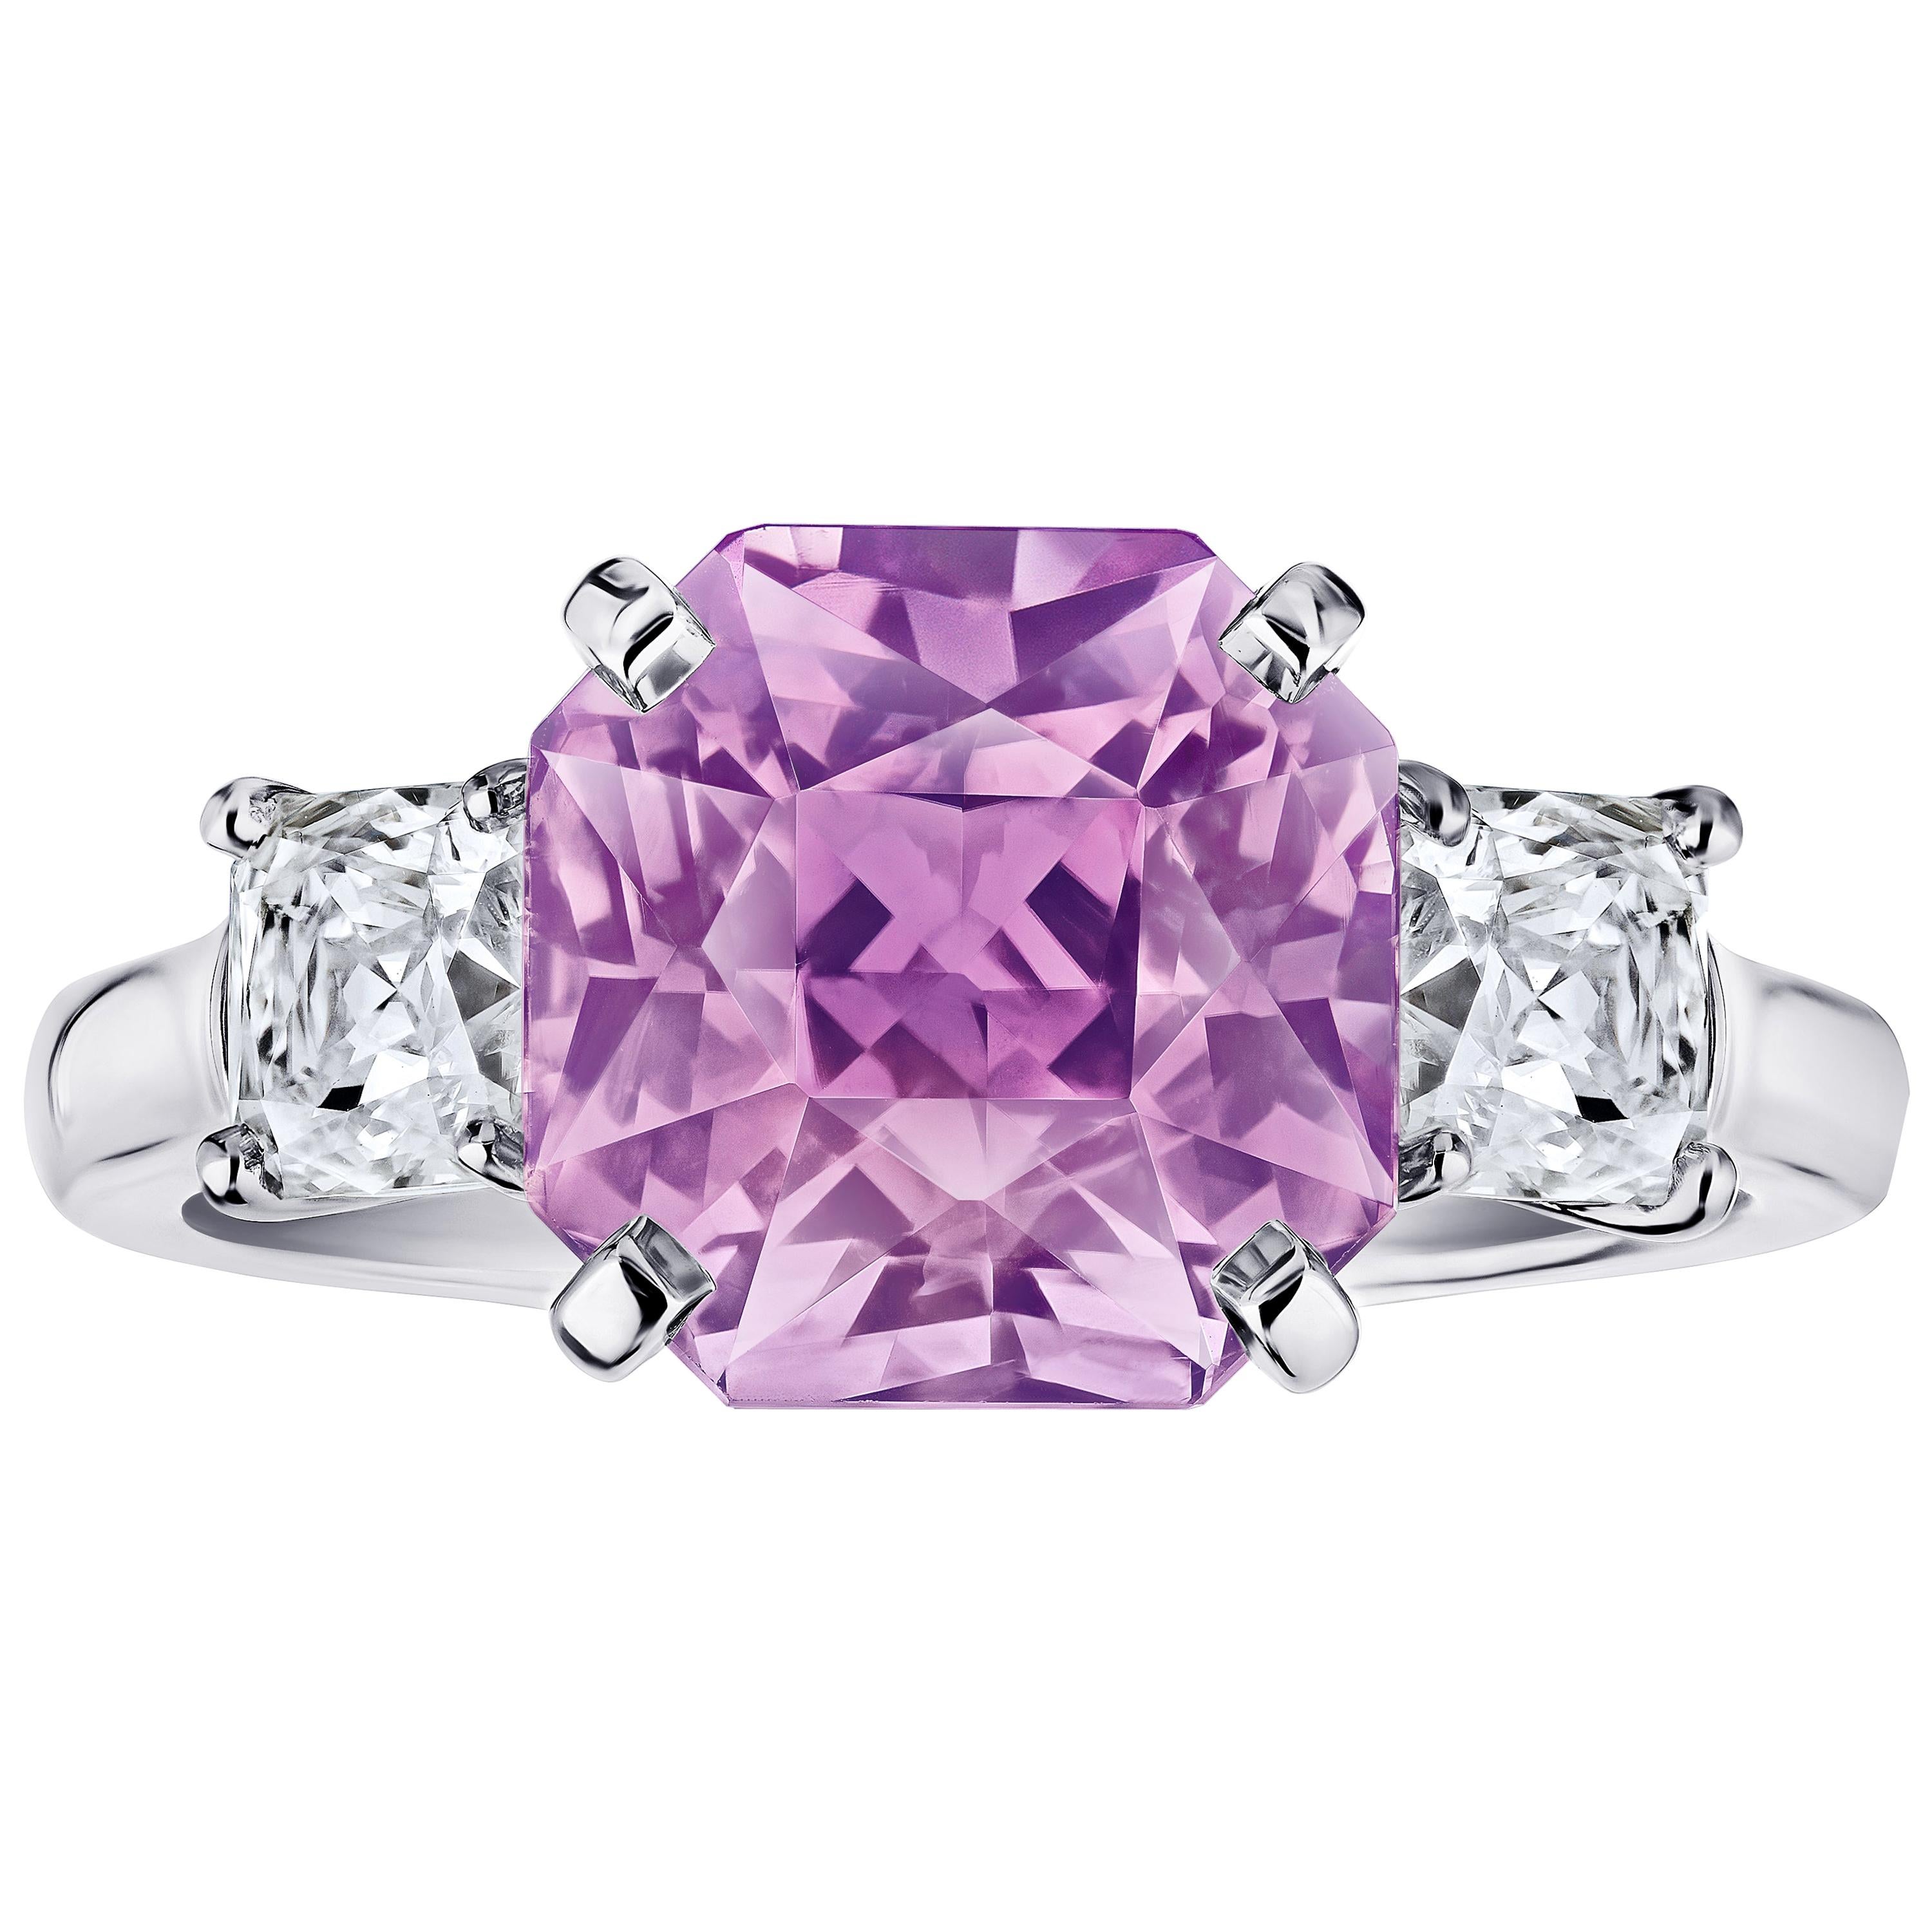 5.96 Carat Radiant Cut Pink Sapphire and Diamond Ring For Sale